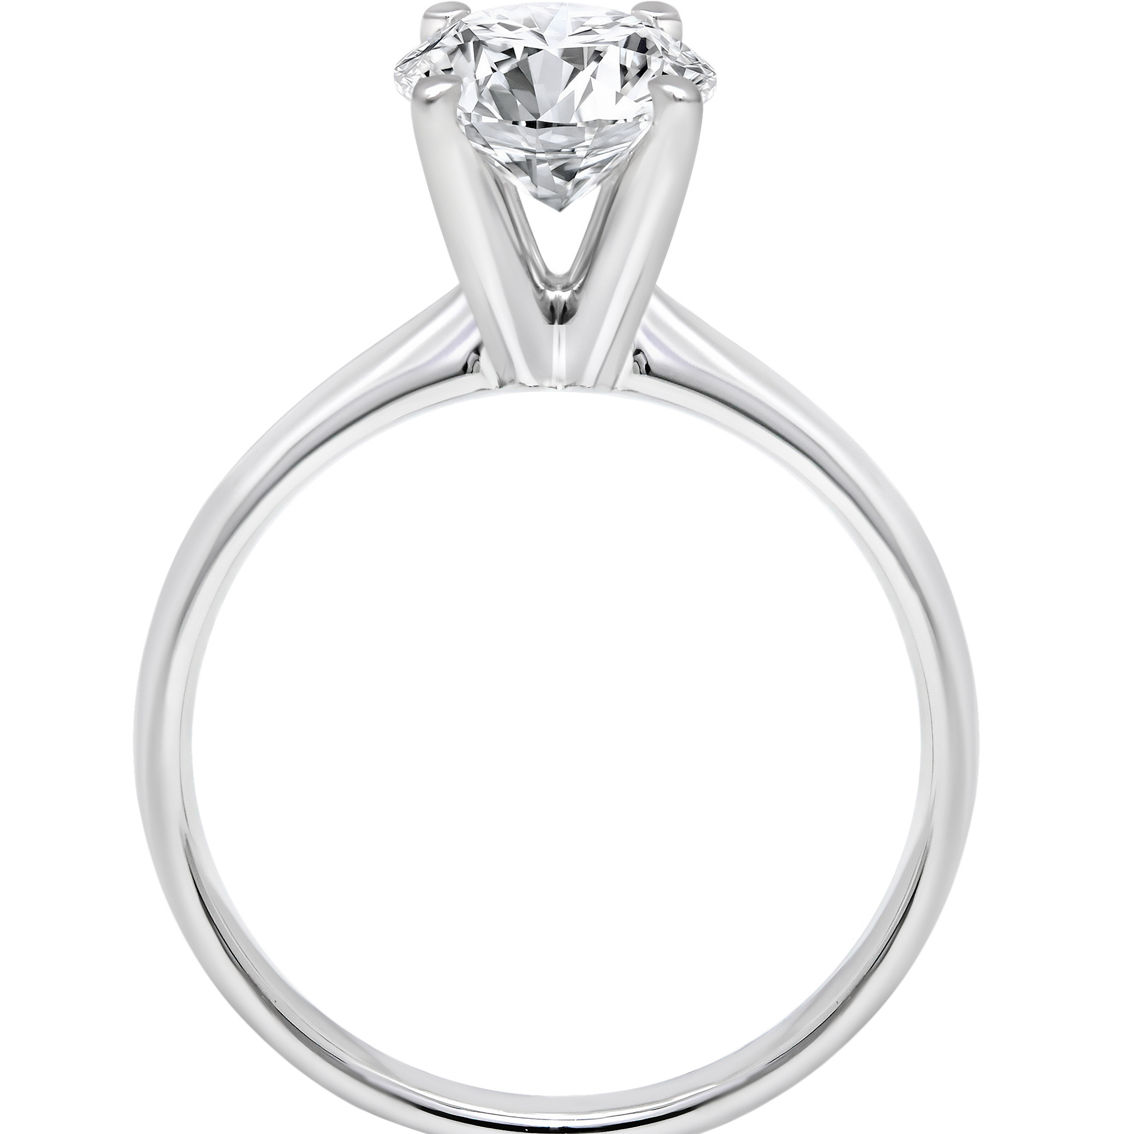 Ray of Brilliance 14K White Gold 2 CTW Lab Grown Round Diamond Solitaire Ring - Image 3 of 4